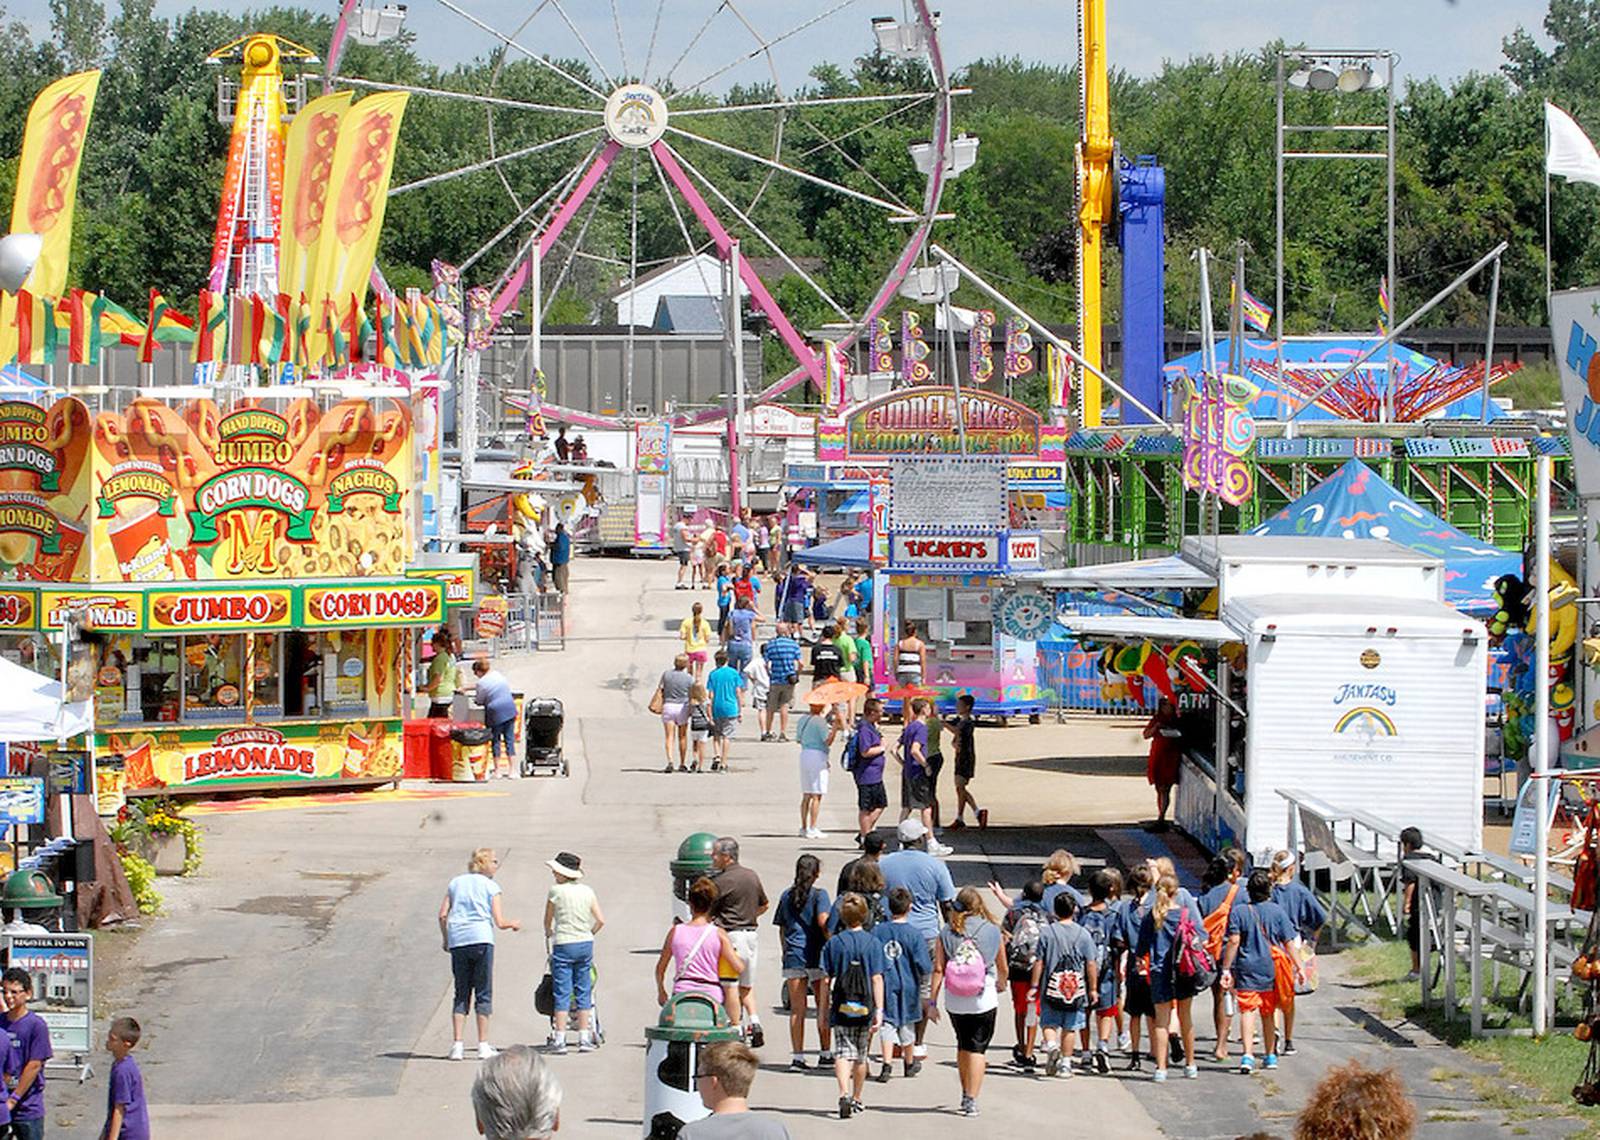 DuPage County Fair returns with talent show, 4H shows, music and more